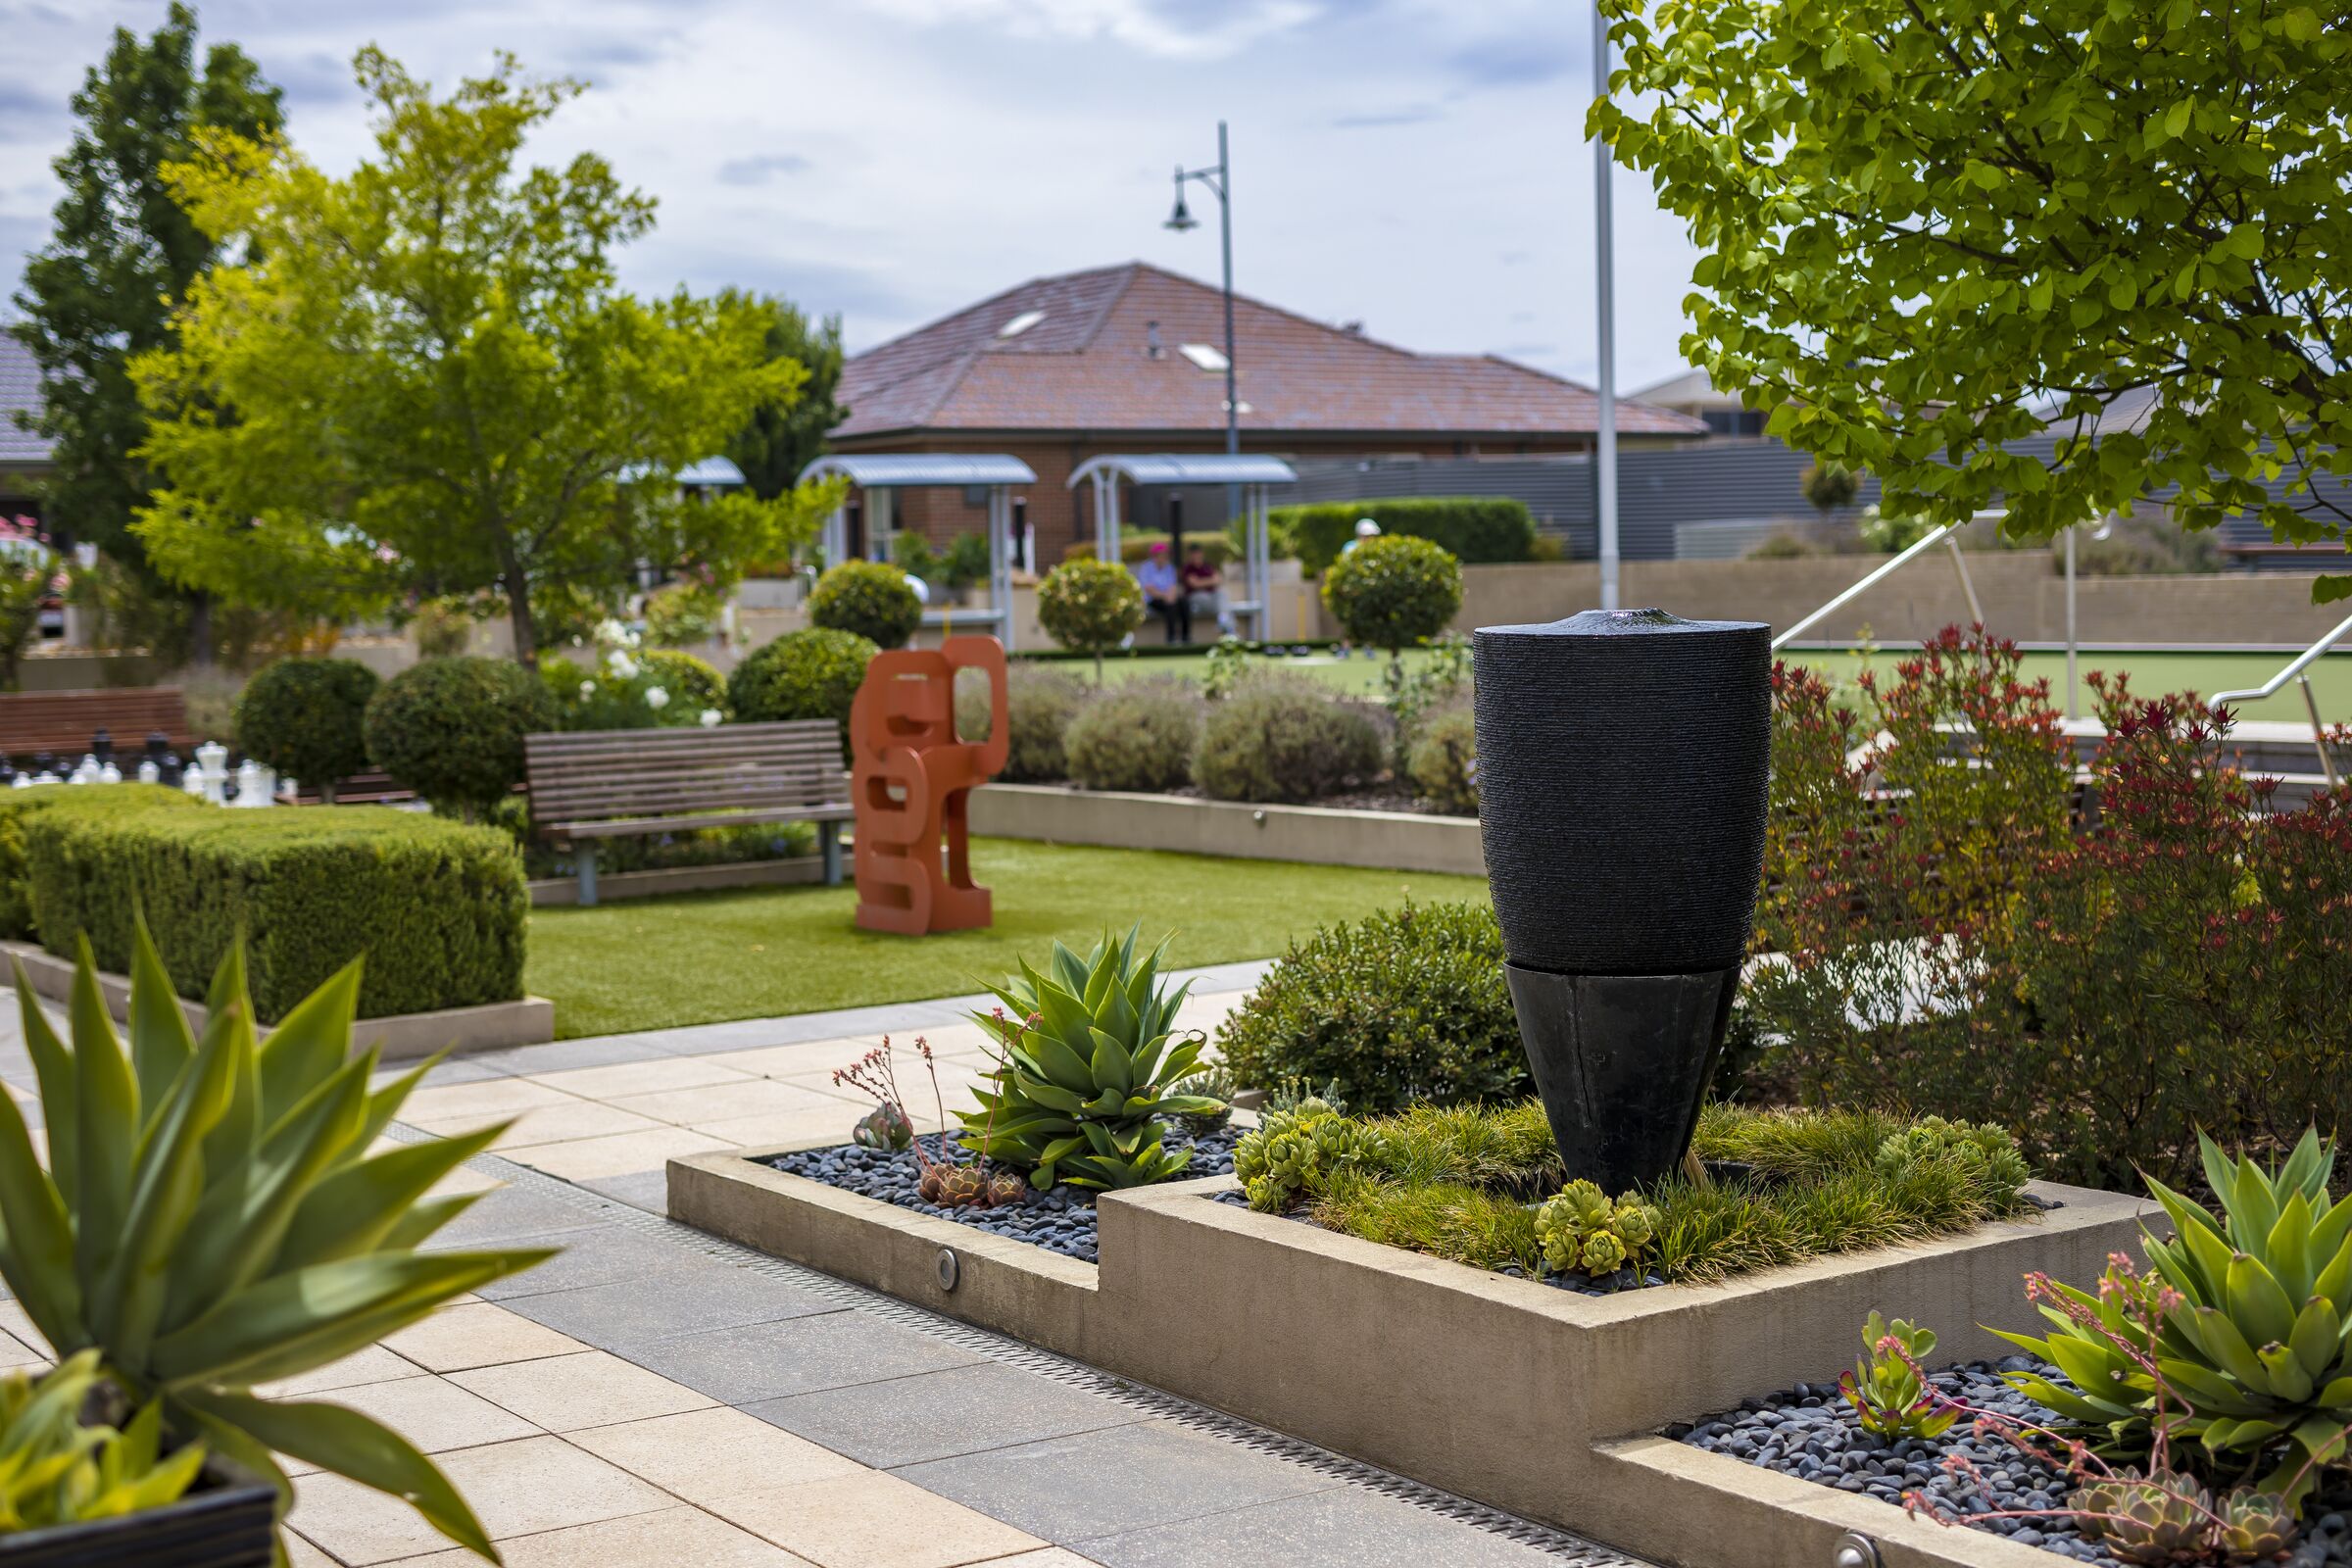 Caesia Gardens landscaping with modern statue artwork, distant outdoor chess and bowling green